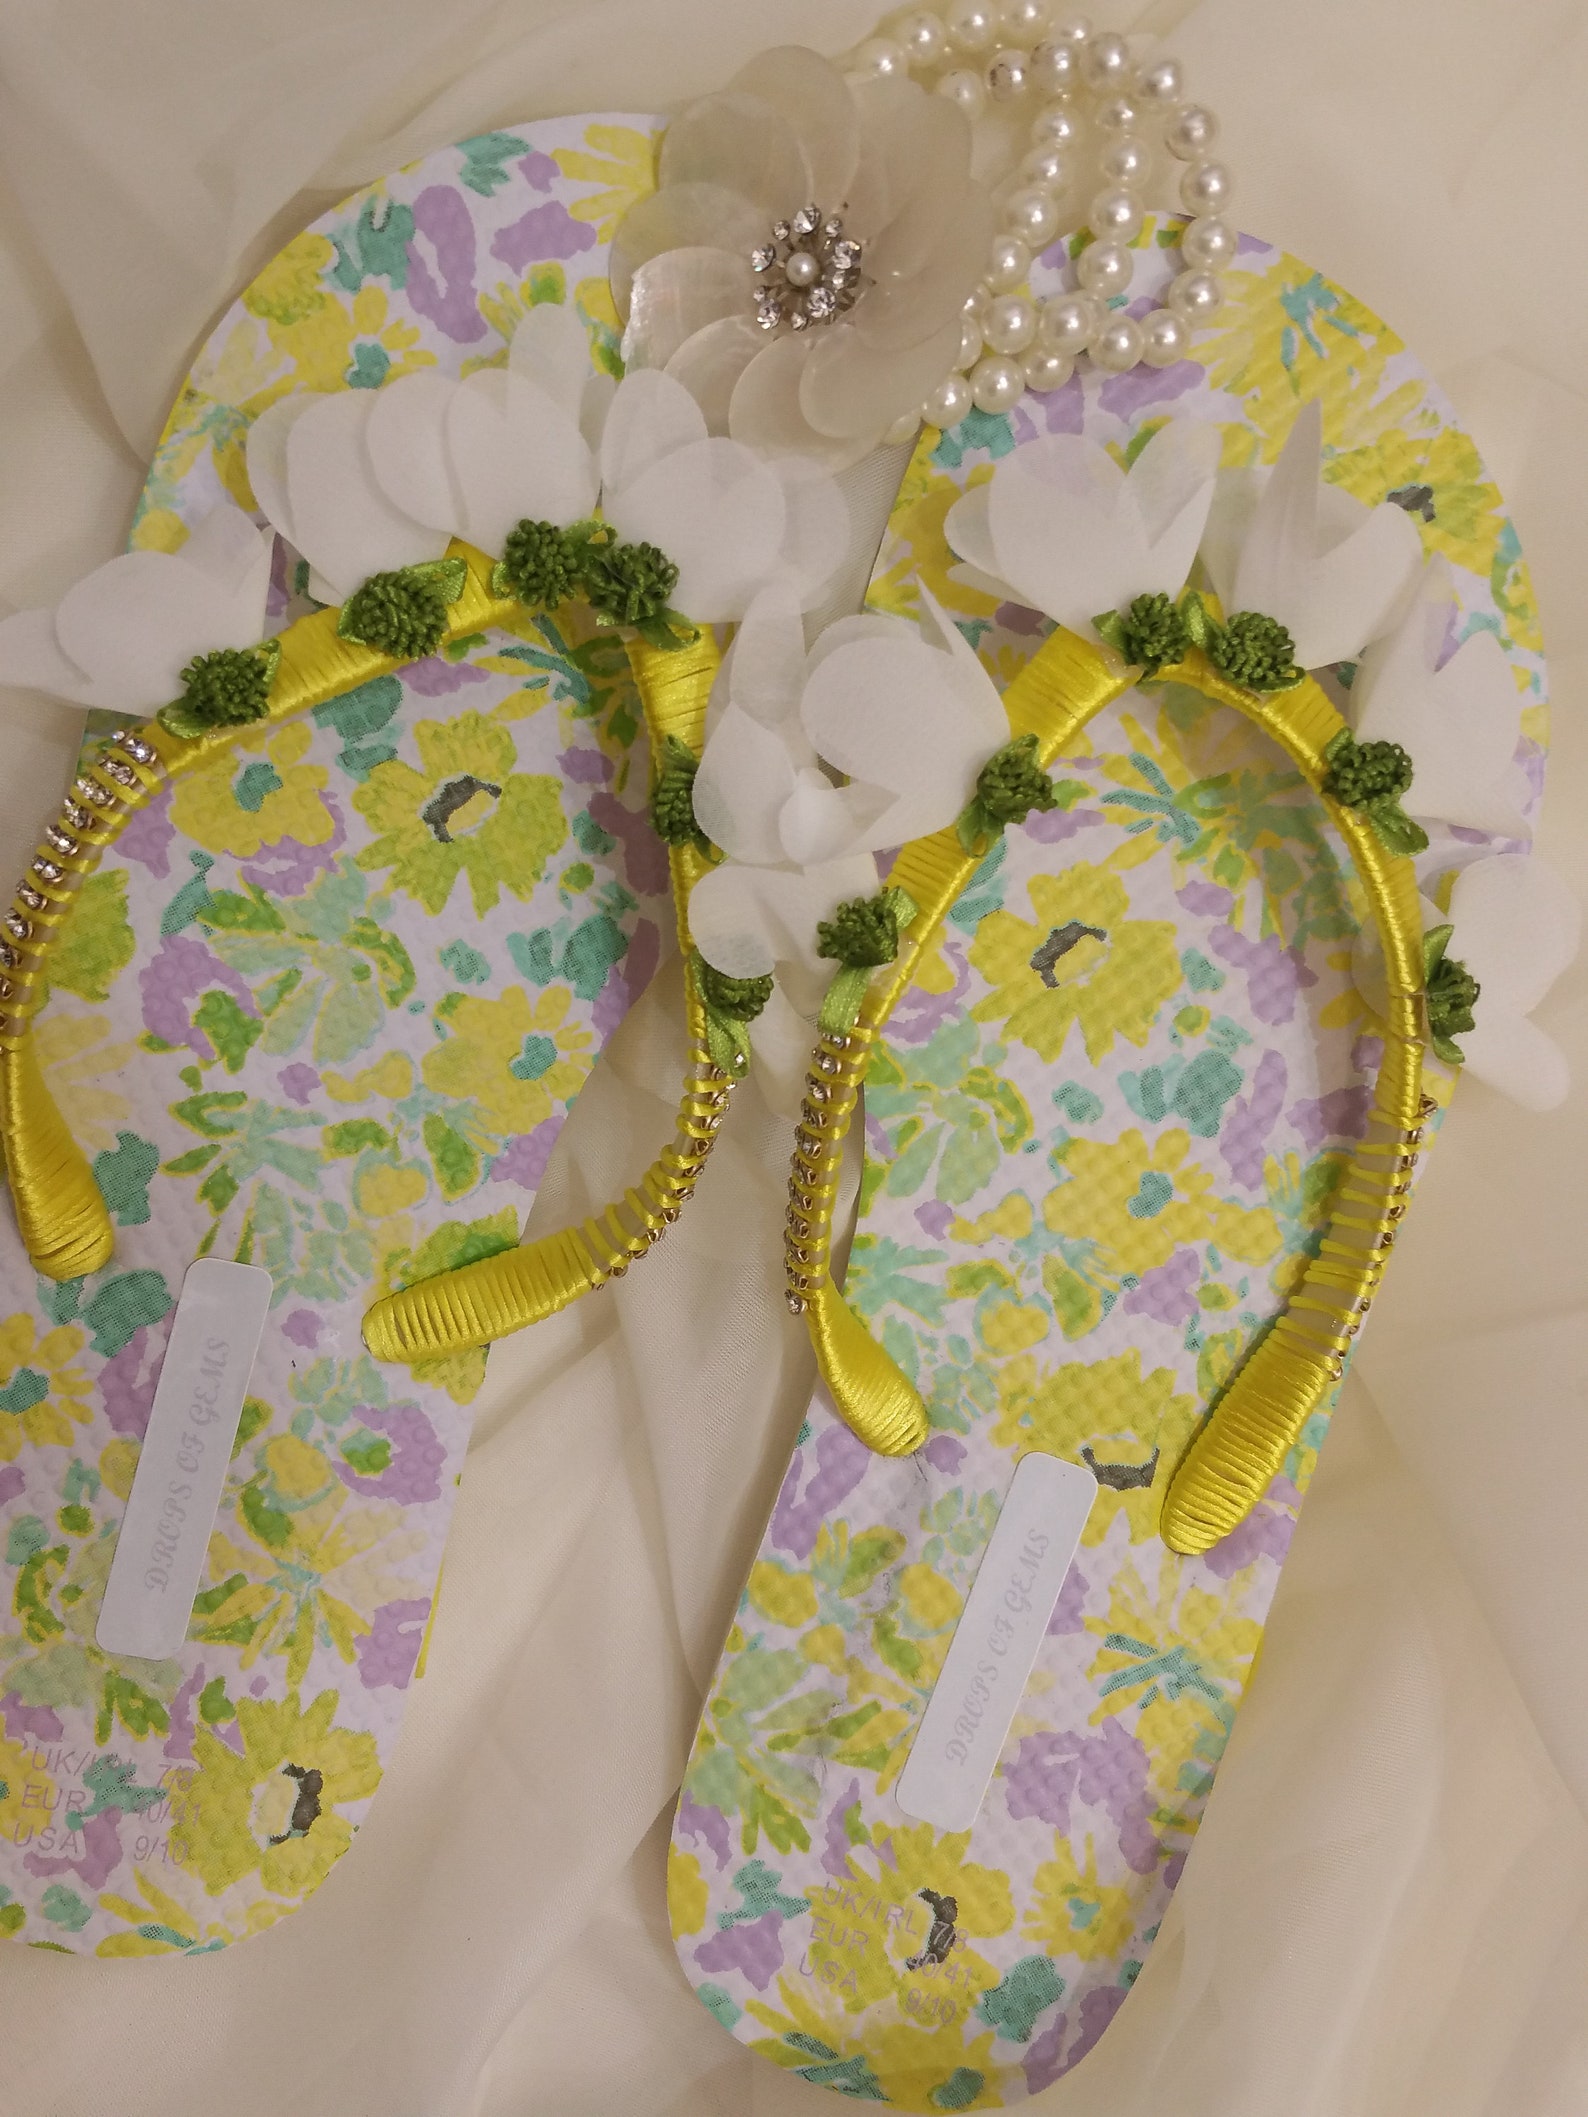 Embellished Flip Flops with Rhinestones and Chiffon Flowers Leaves